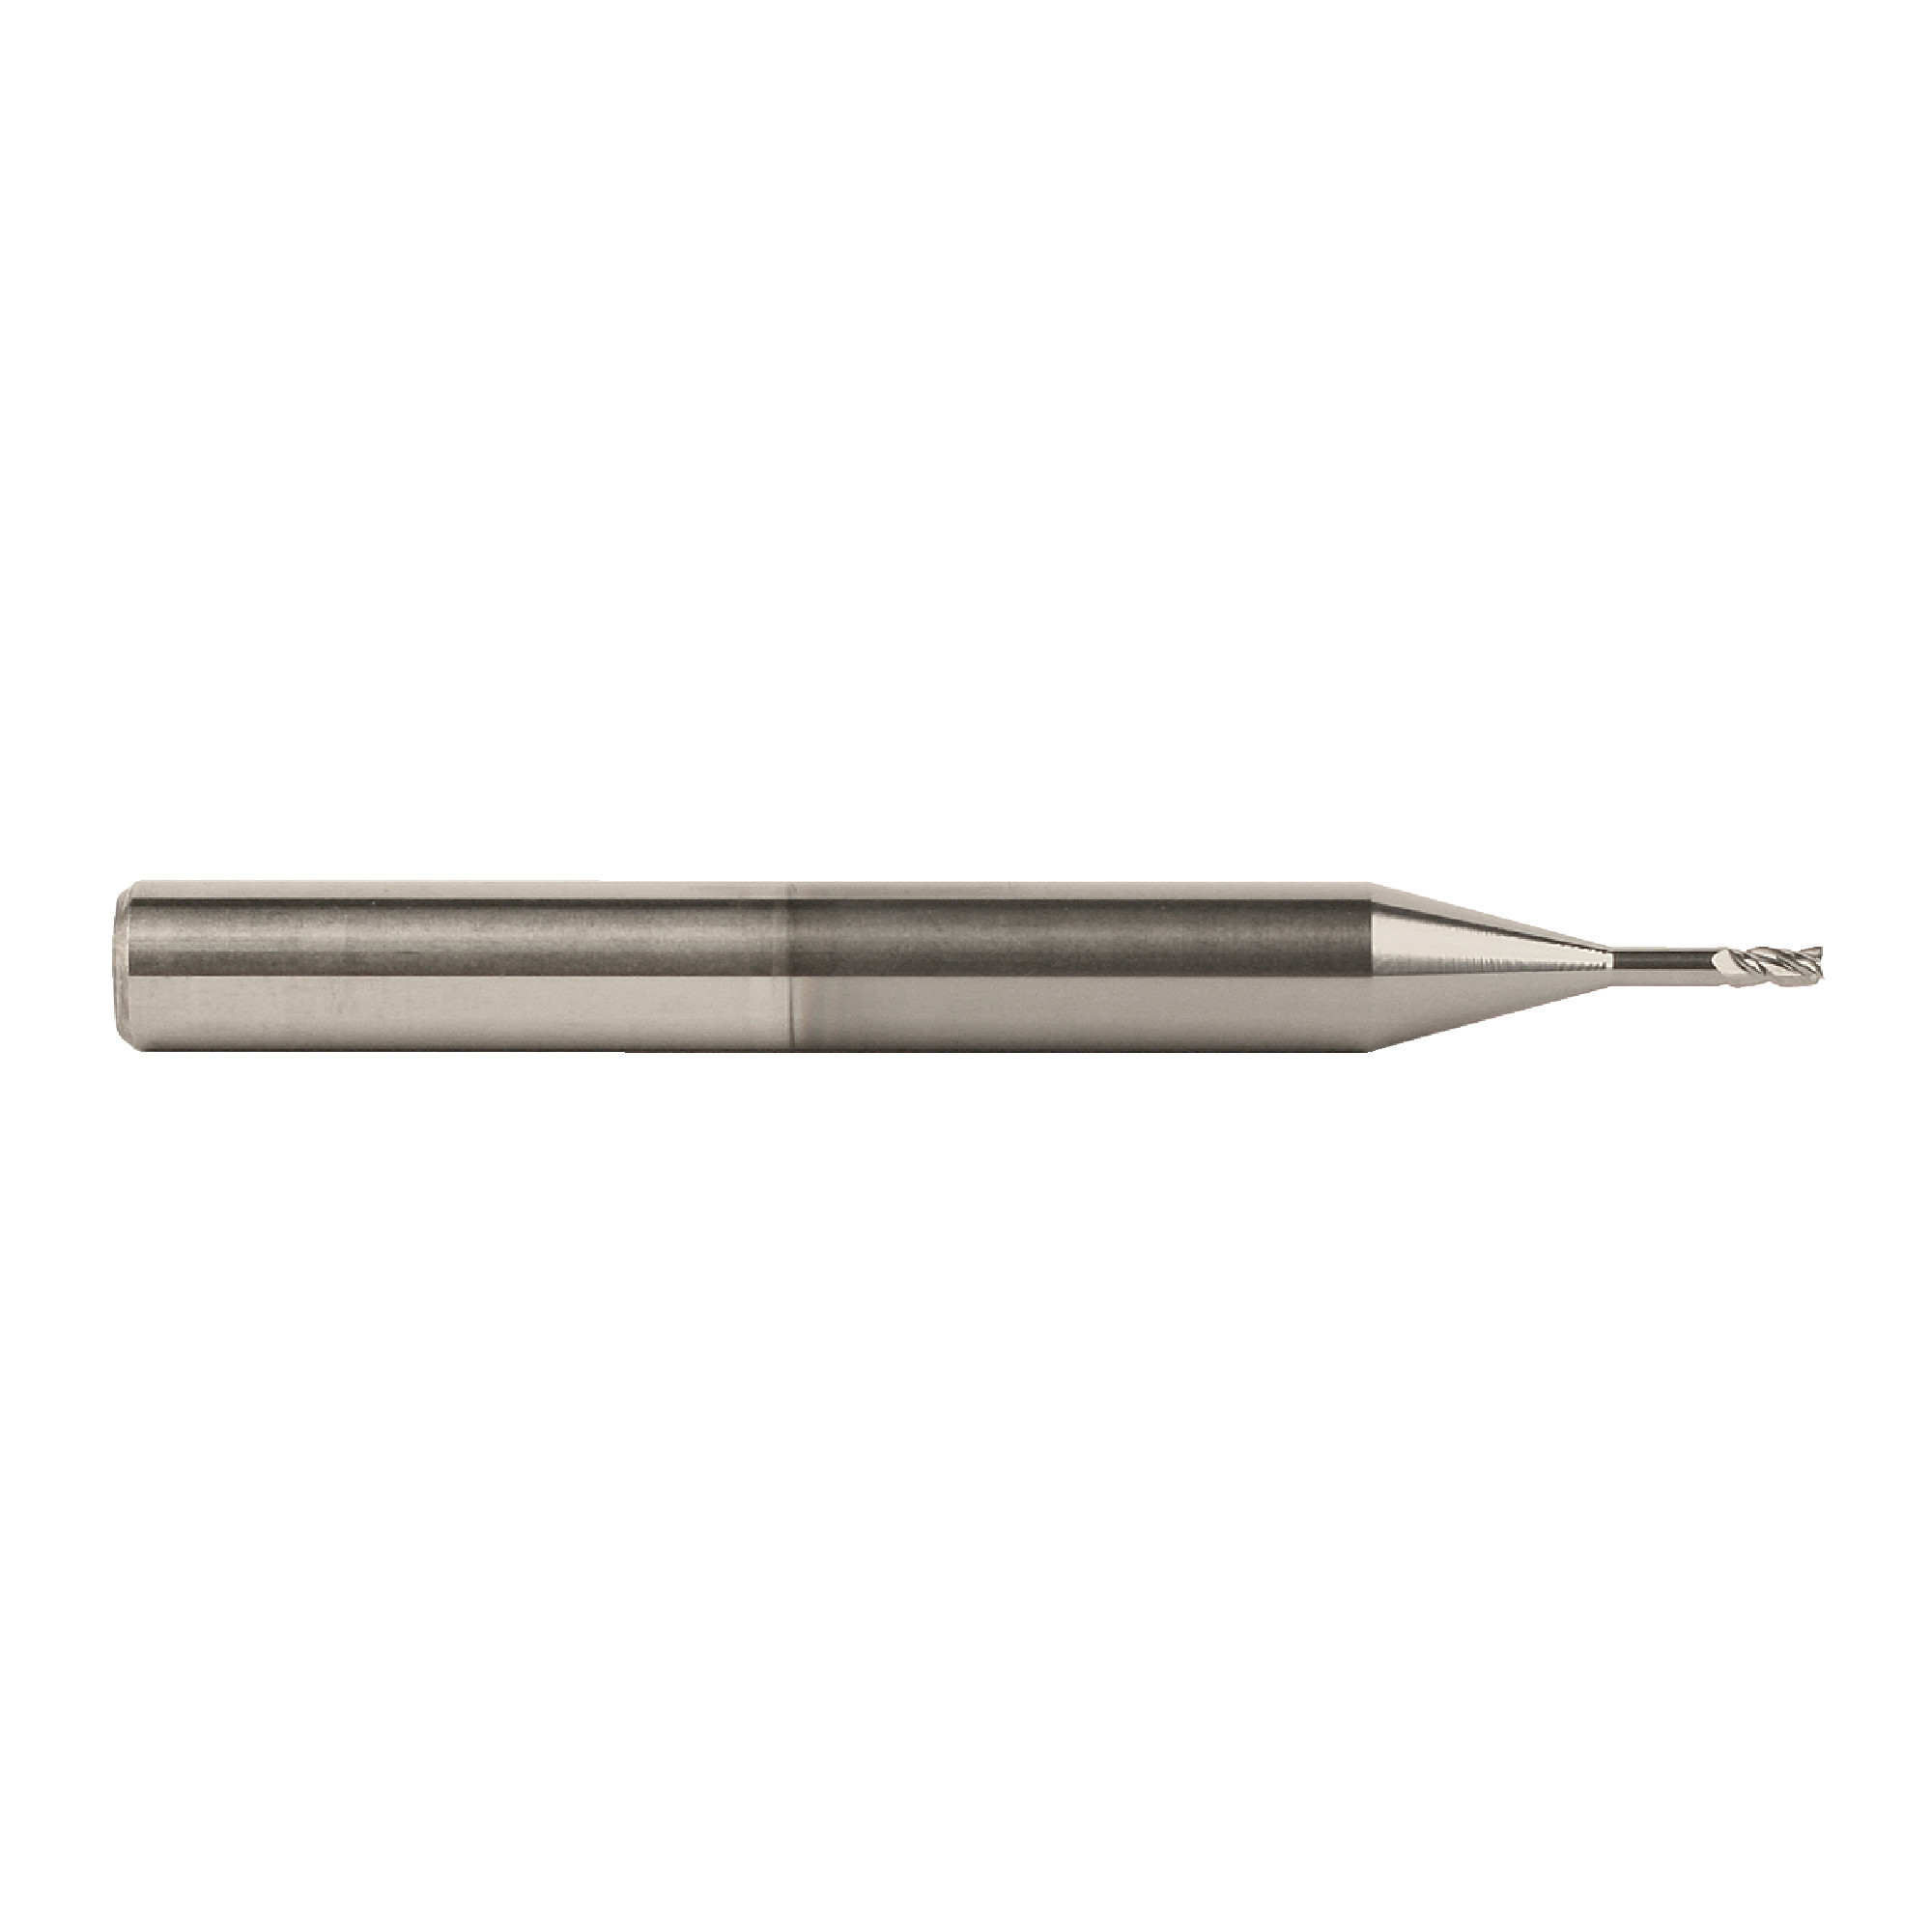 1/4" Shank Solid Carbide 3 Flute Single End Mill